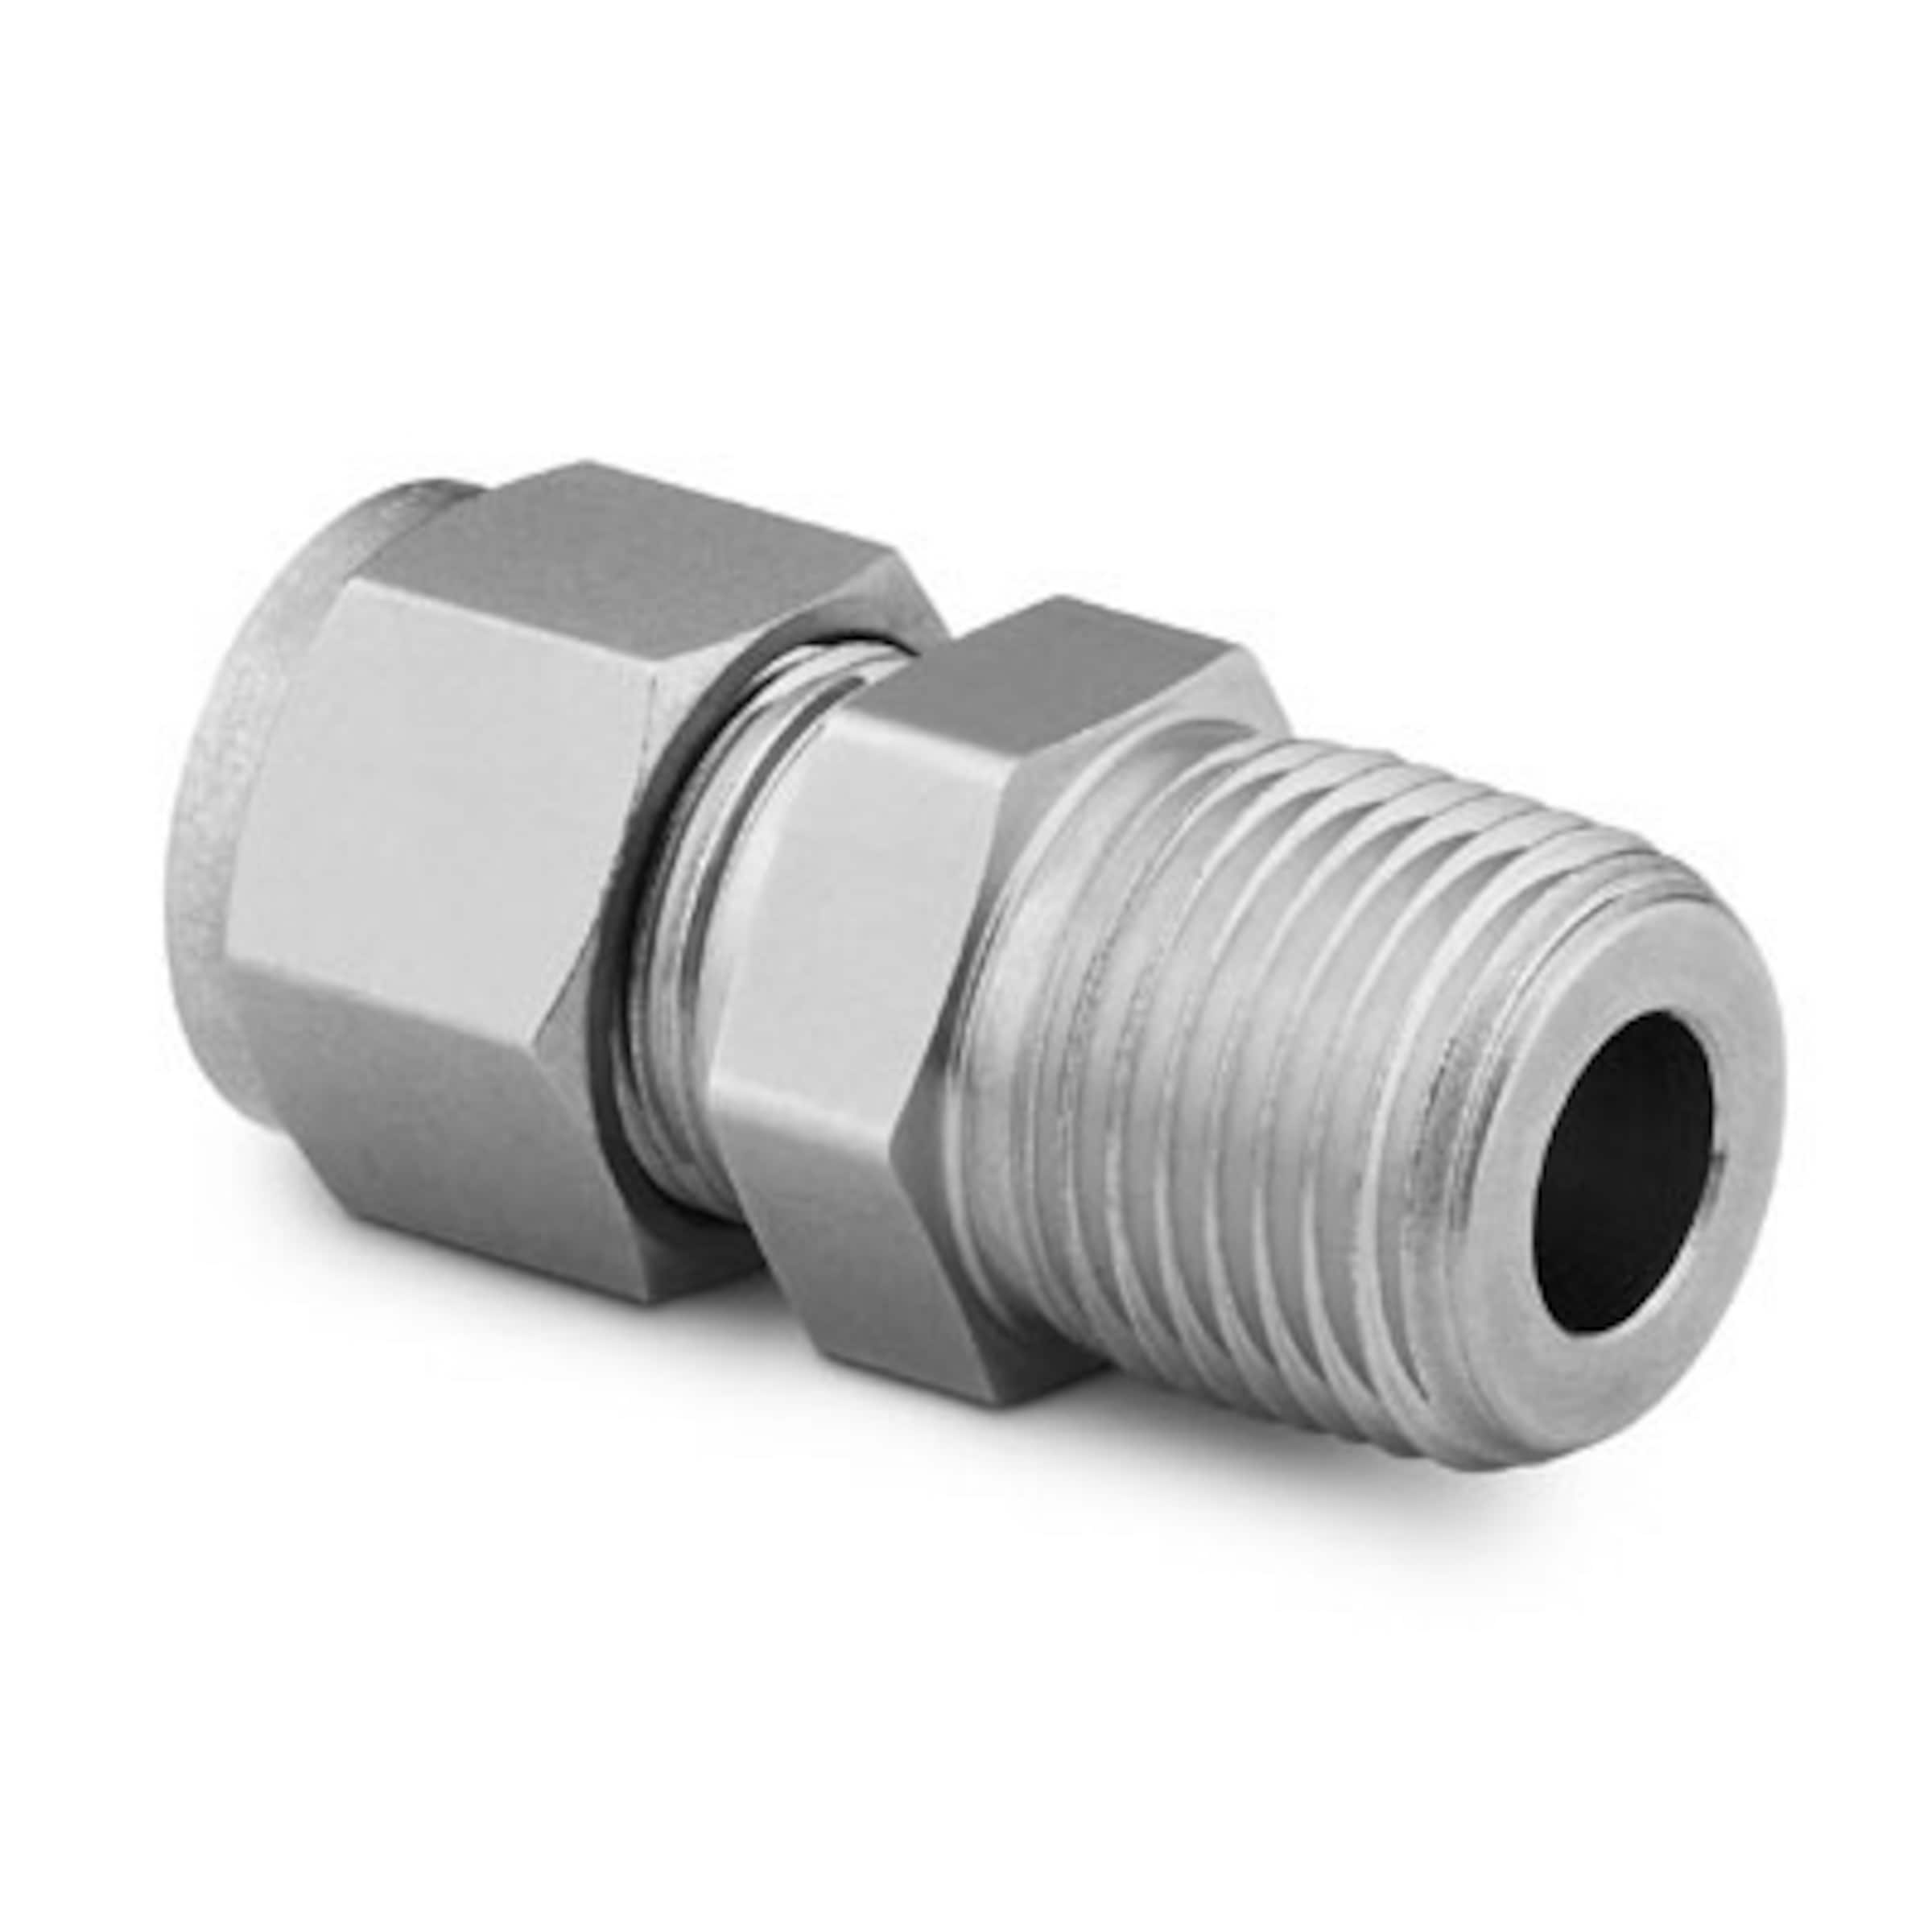 BSP Tube Barb Connector Thread Female to Male Stainless 1/4" 3/8" 3/4" 1/2" 1" 